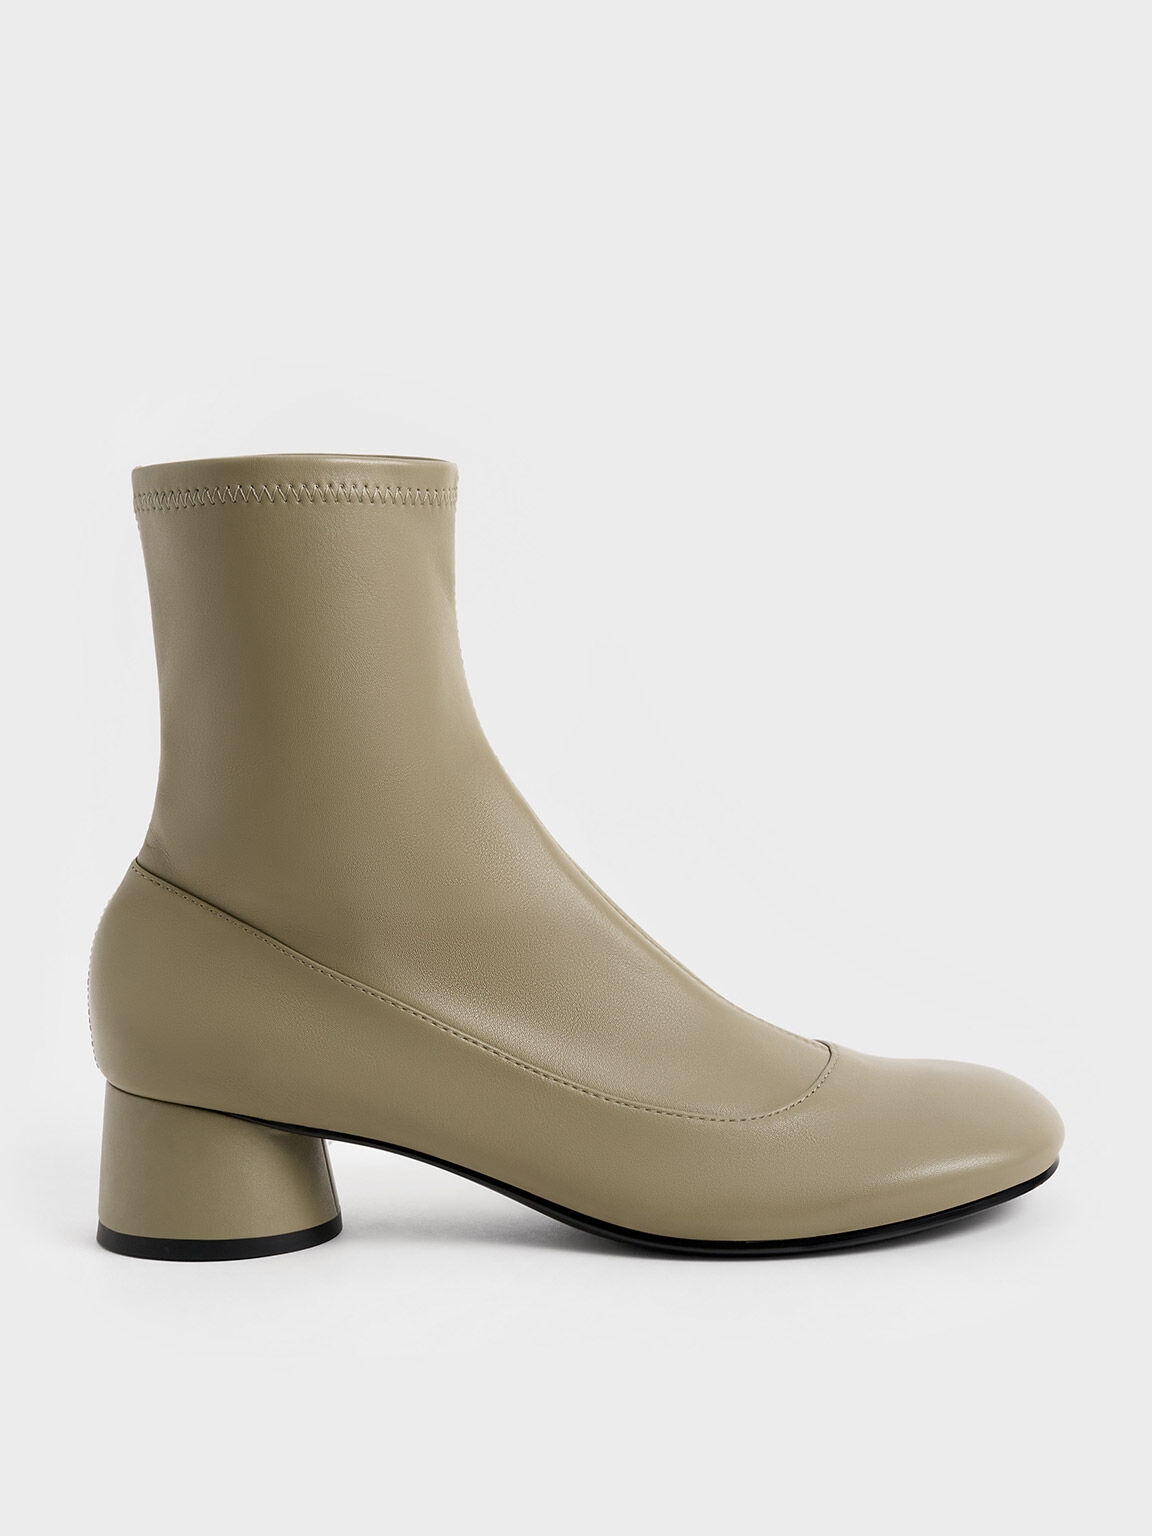 Stitch-Trim Ankle Boots, Olive, hi-res